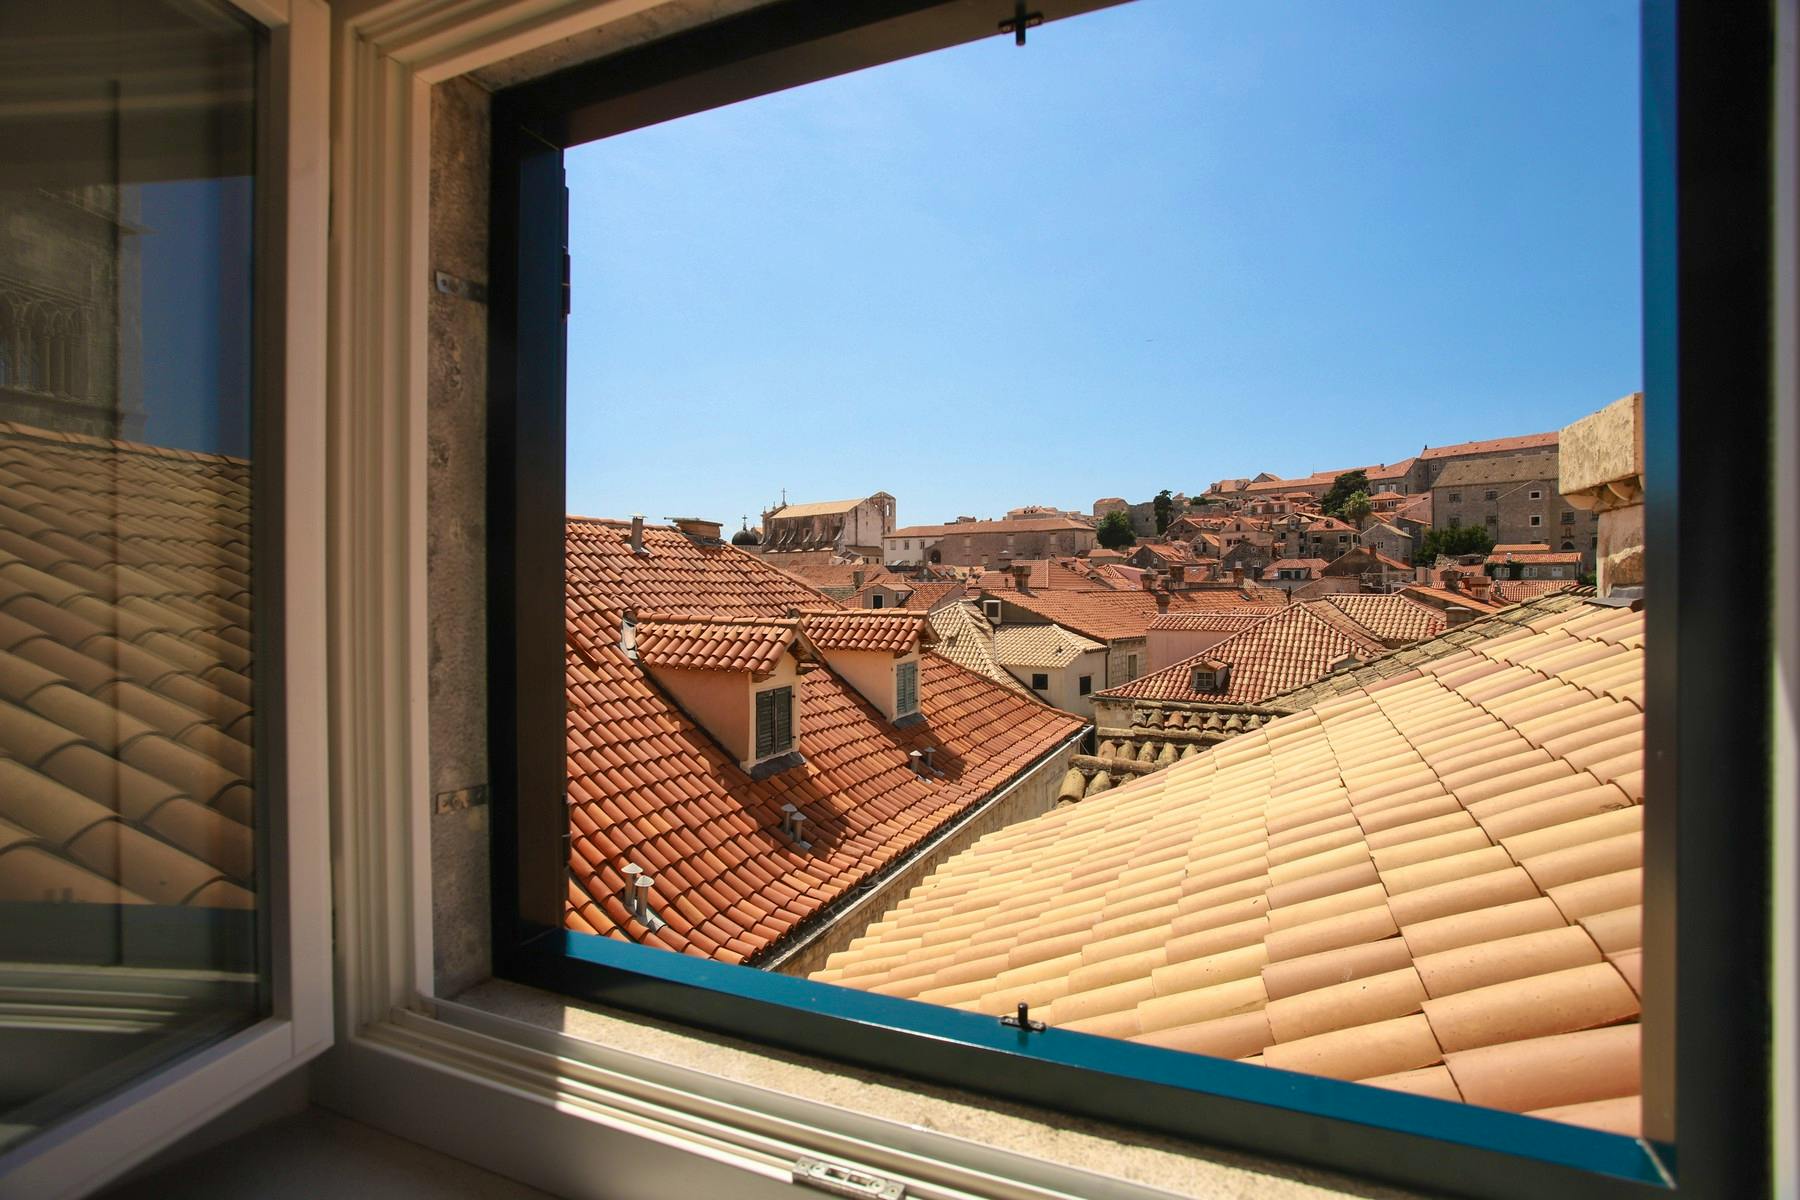 View of the old town of Dubrovnik from the bedroom